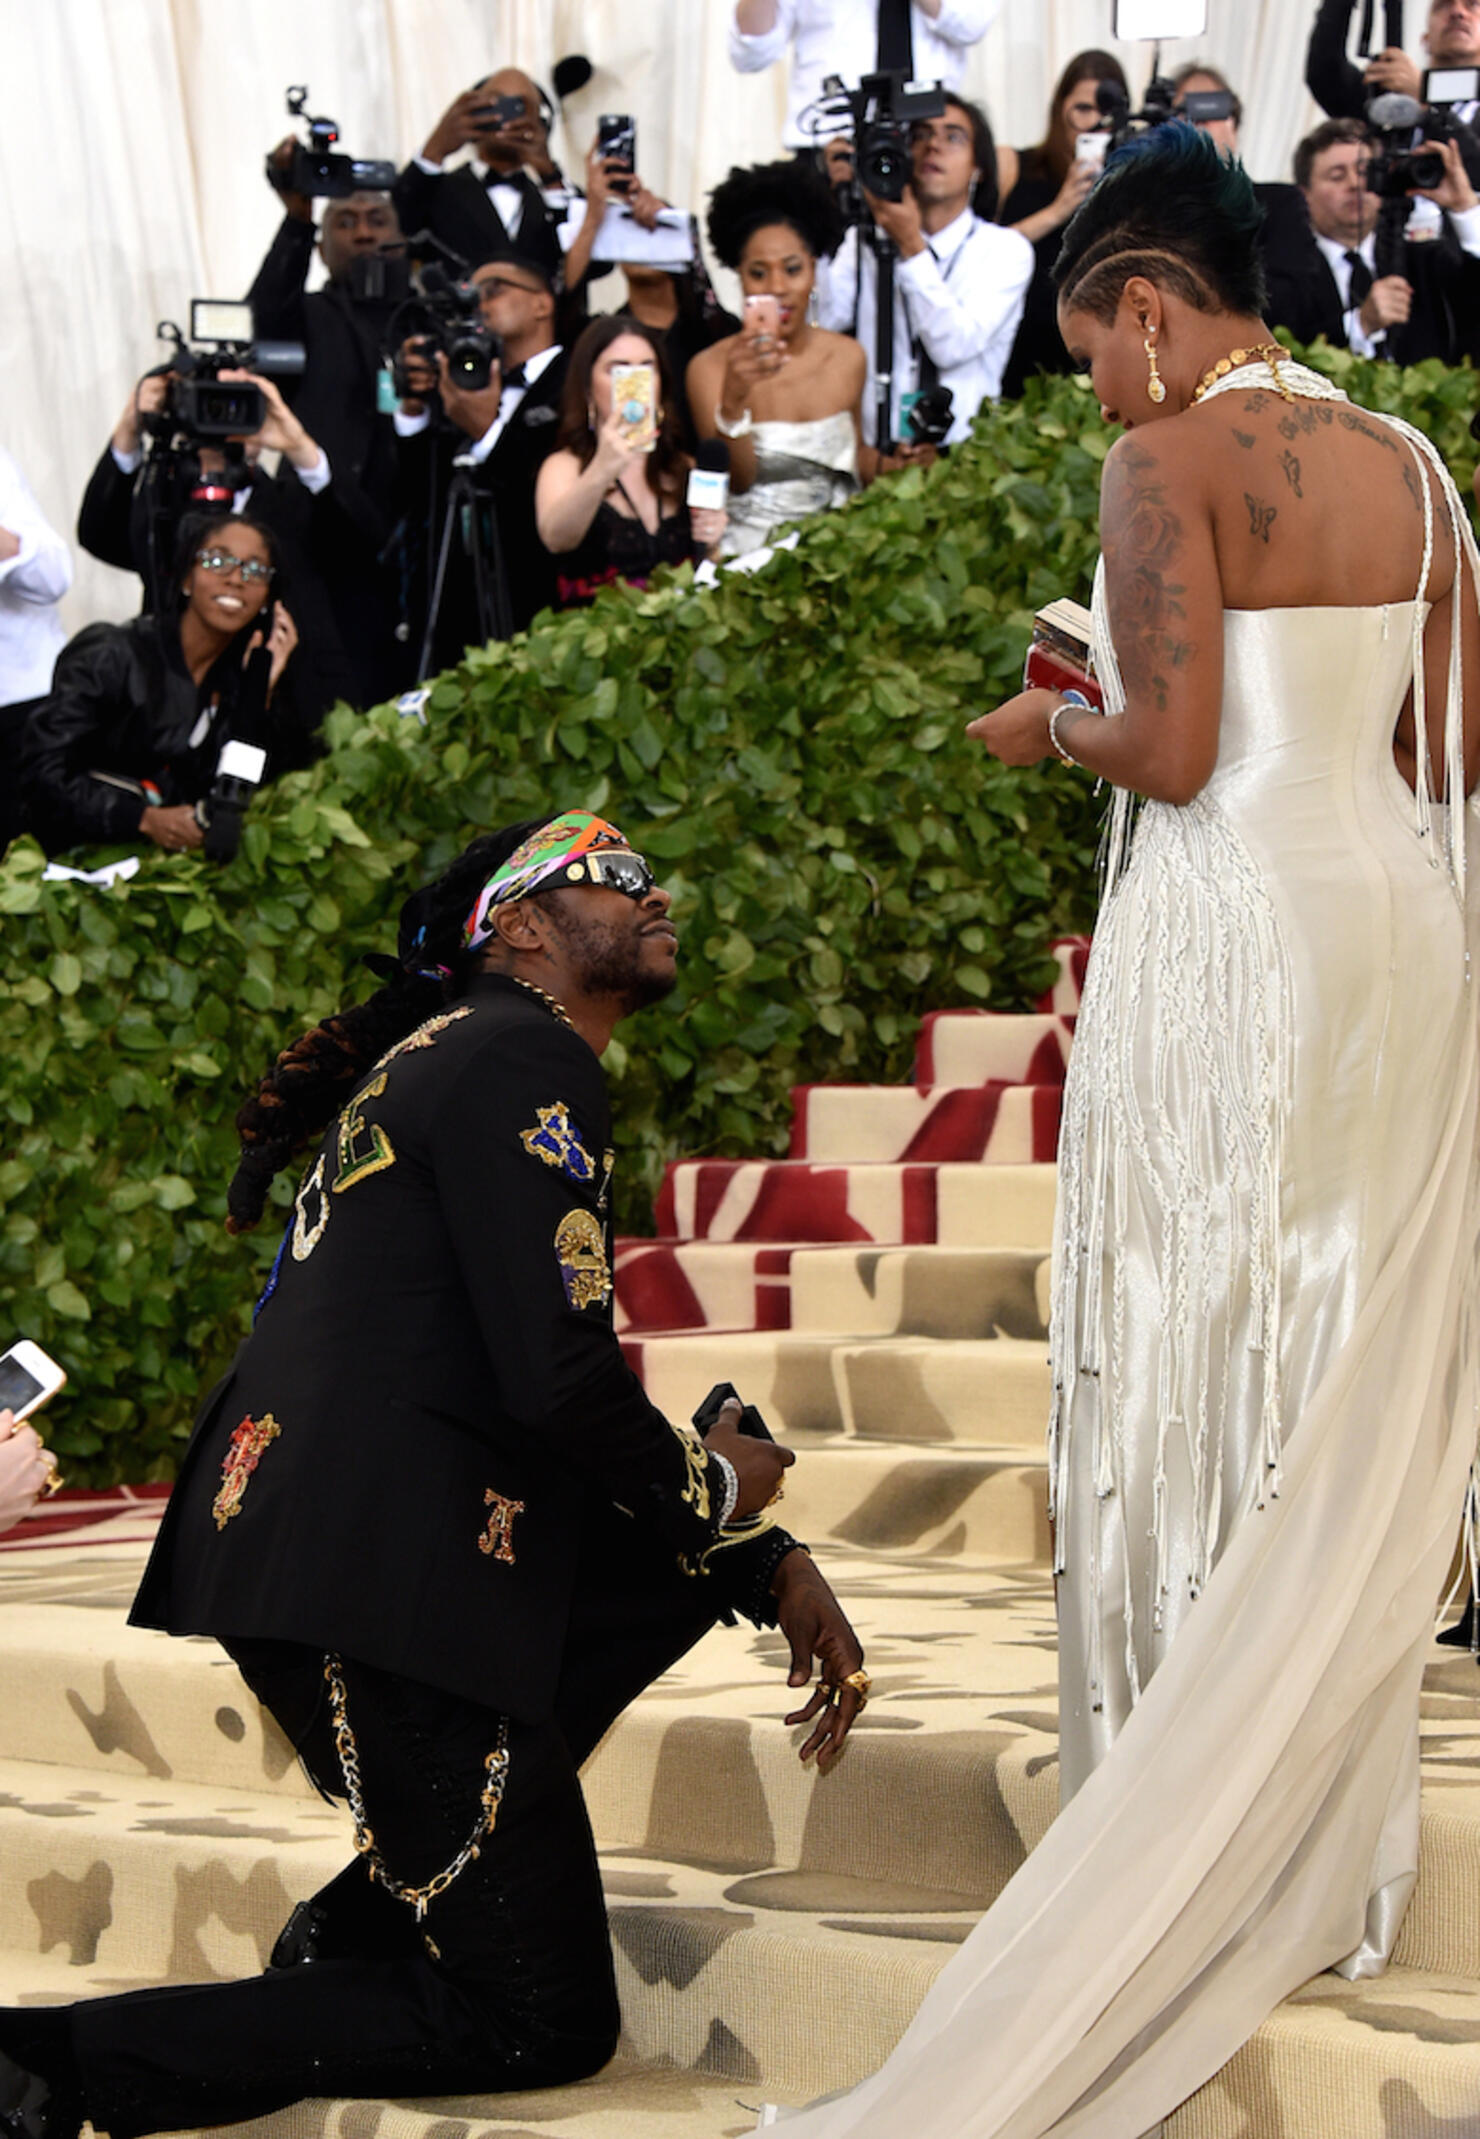 2 Chainz gets engaged at the Met Gala